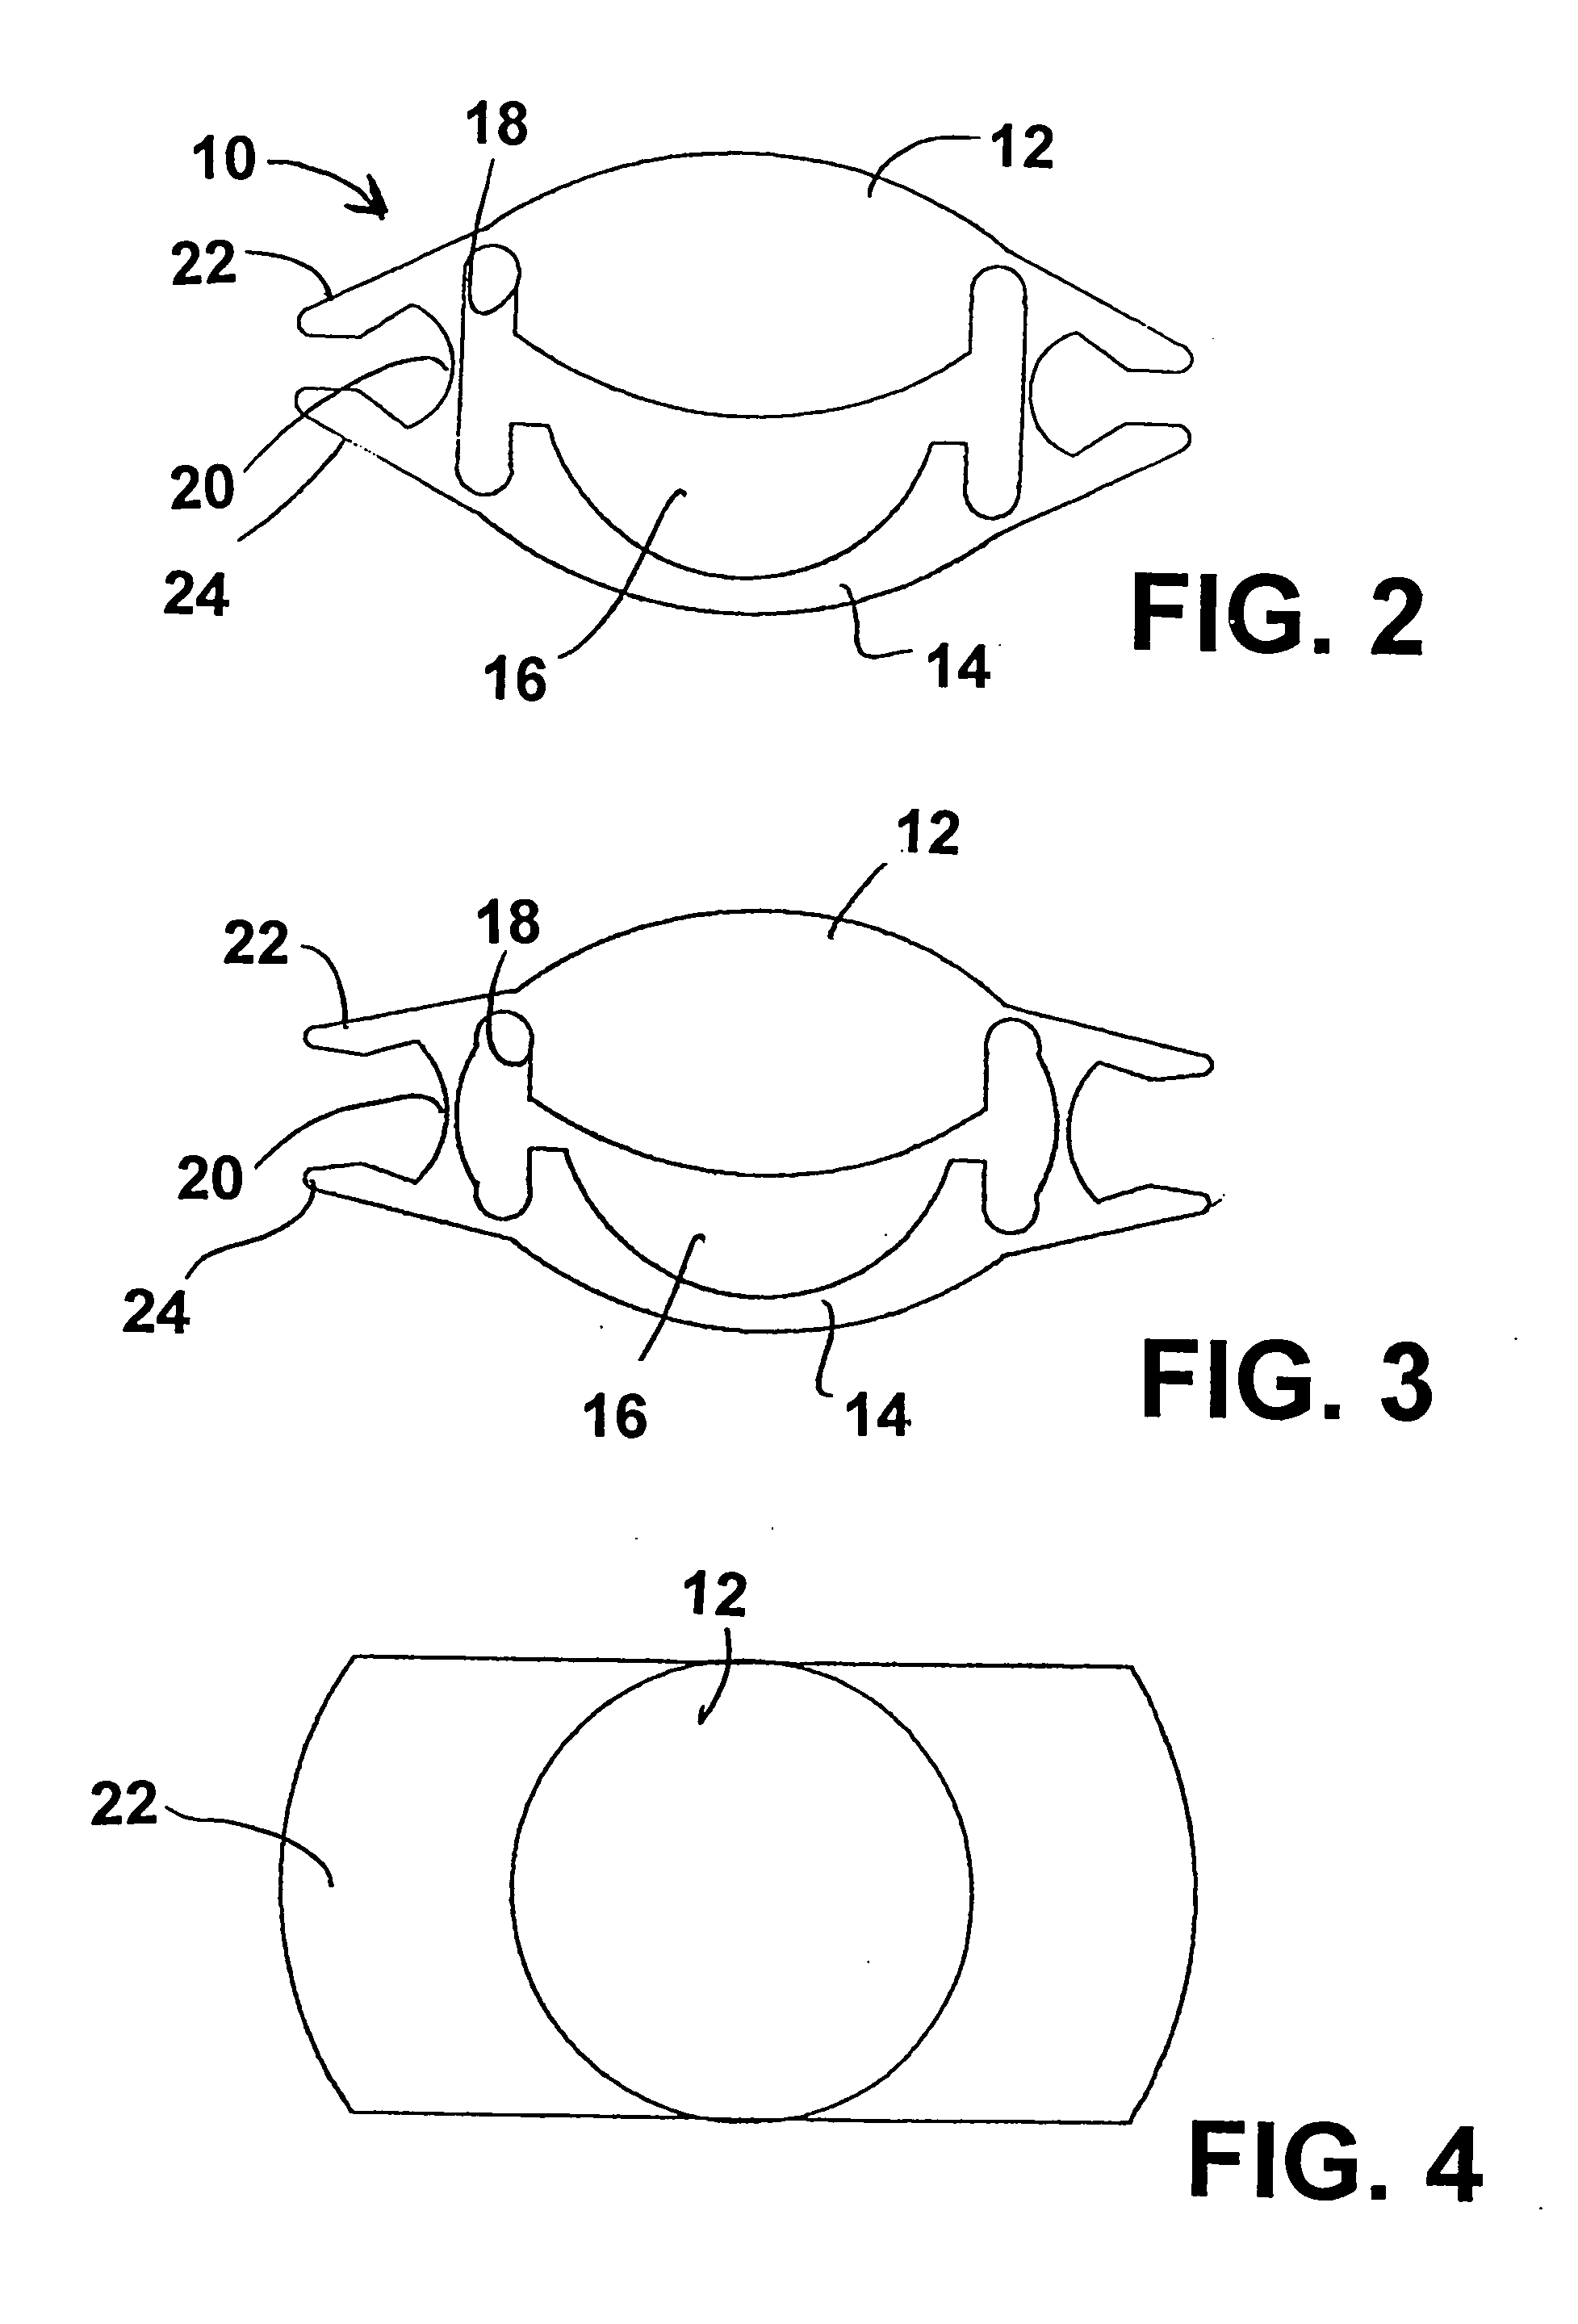 High gain wide range accommodating intraocular lens for implant into the capsular bag